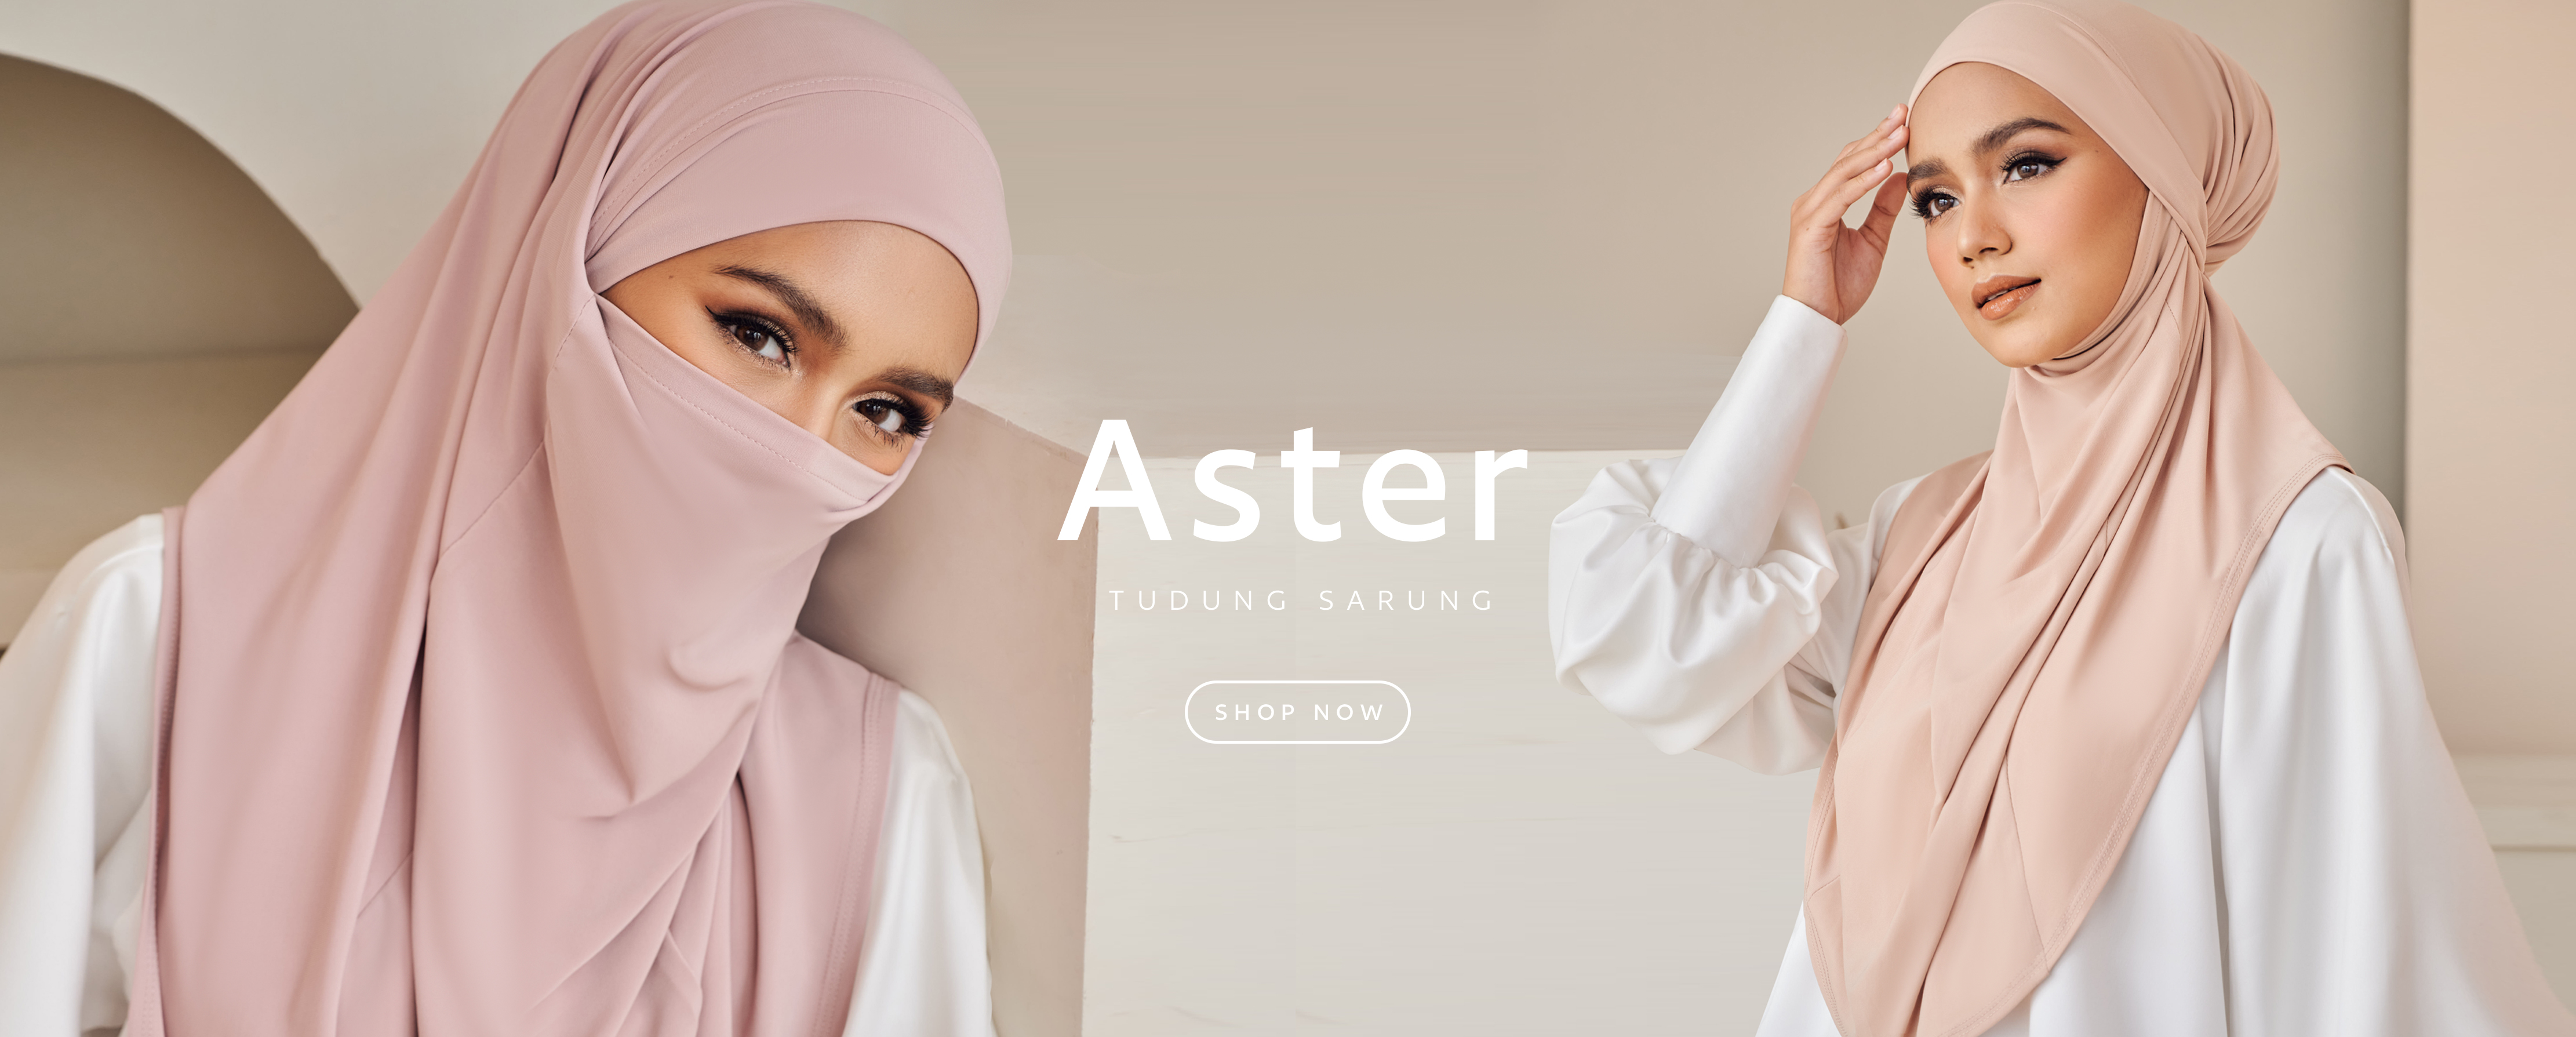 ASTER TUDUNG INSTANT